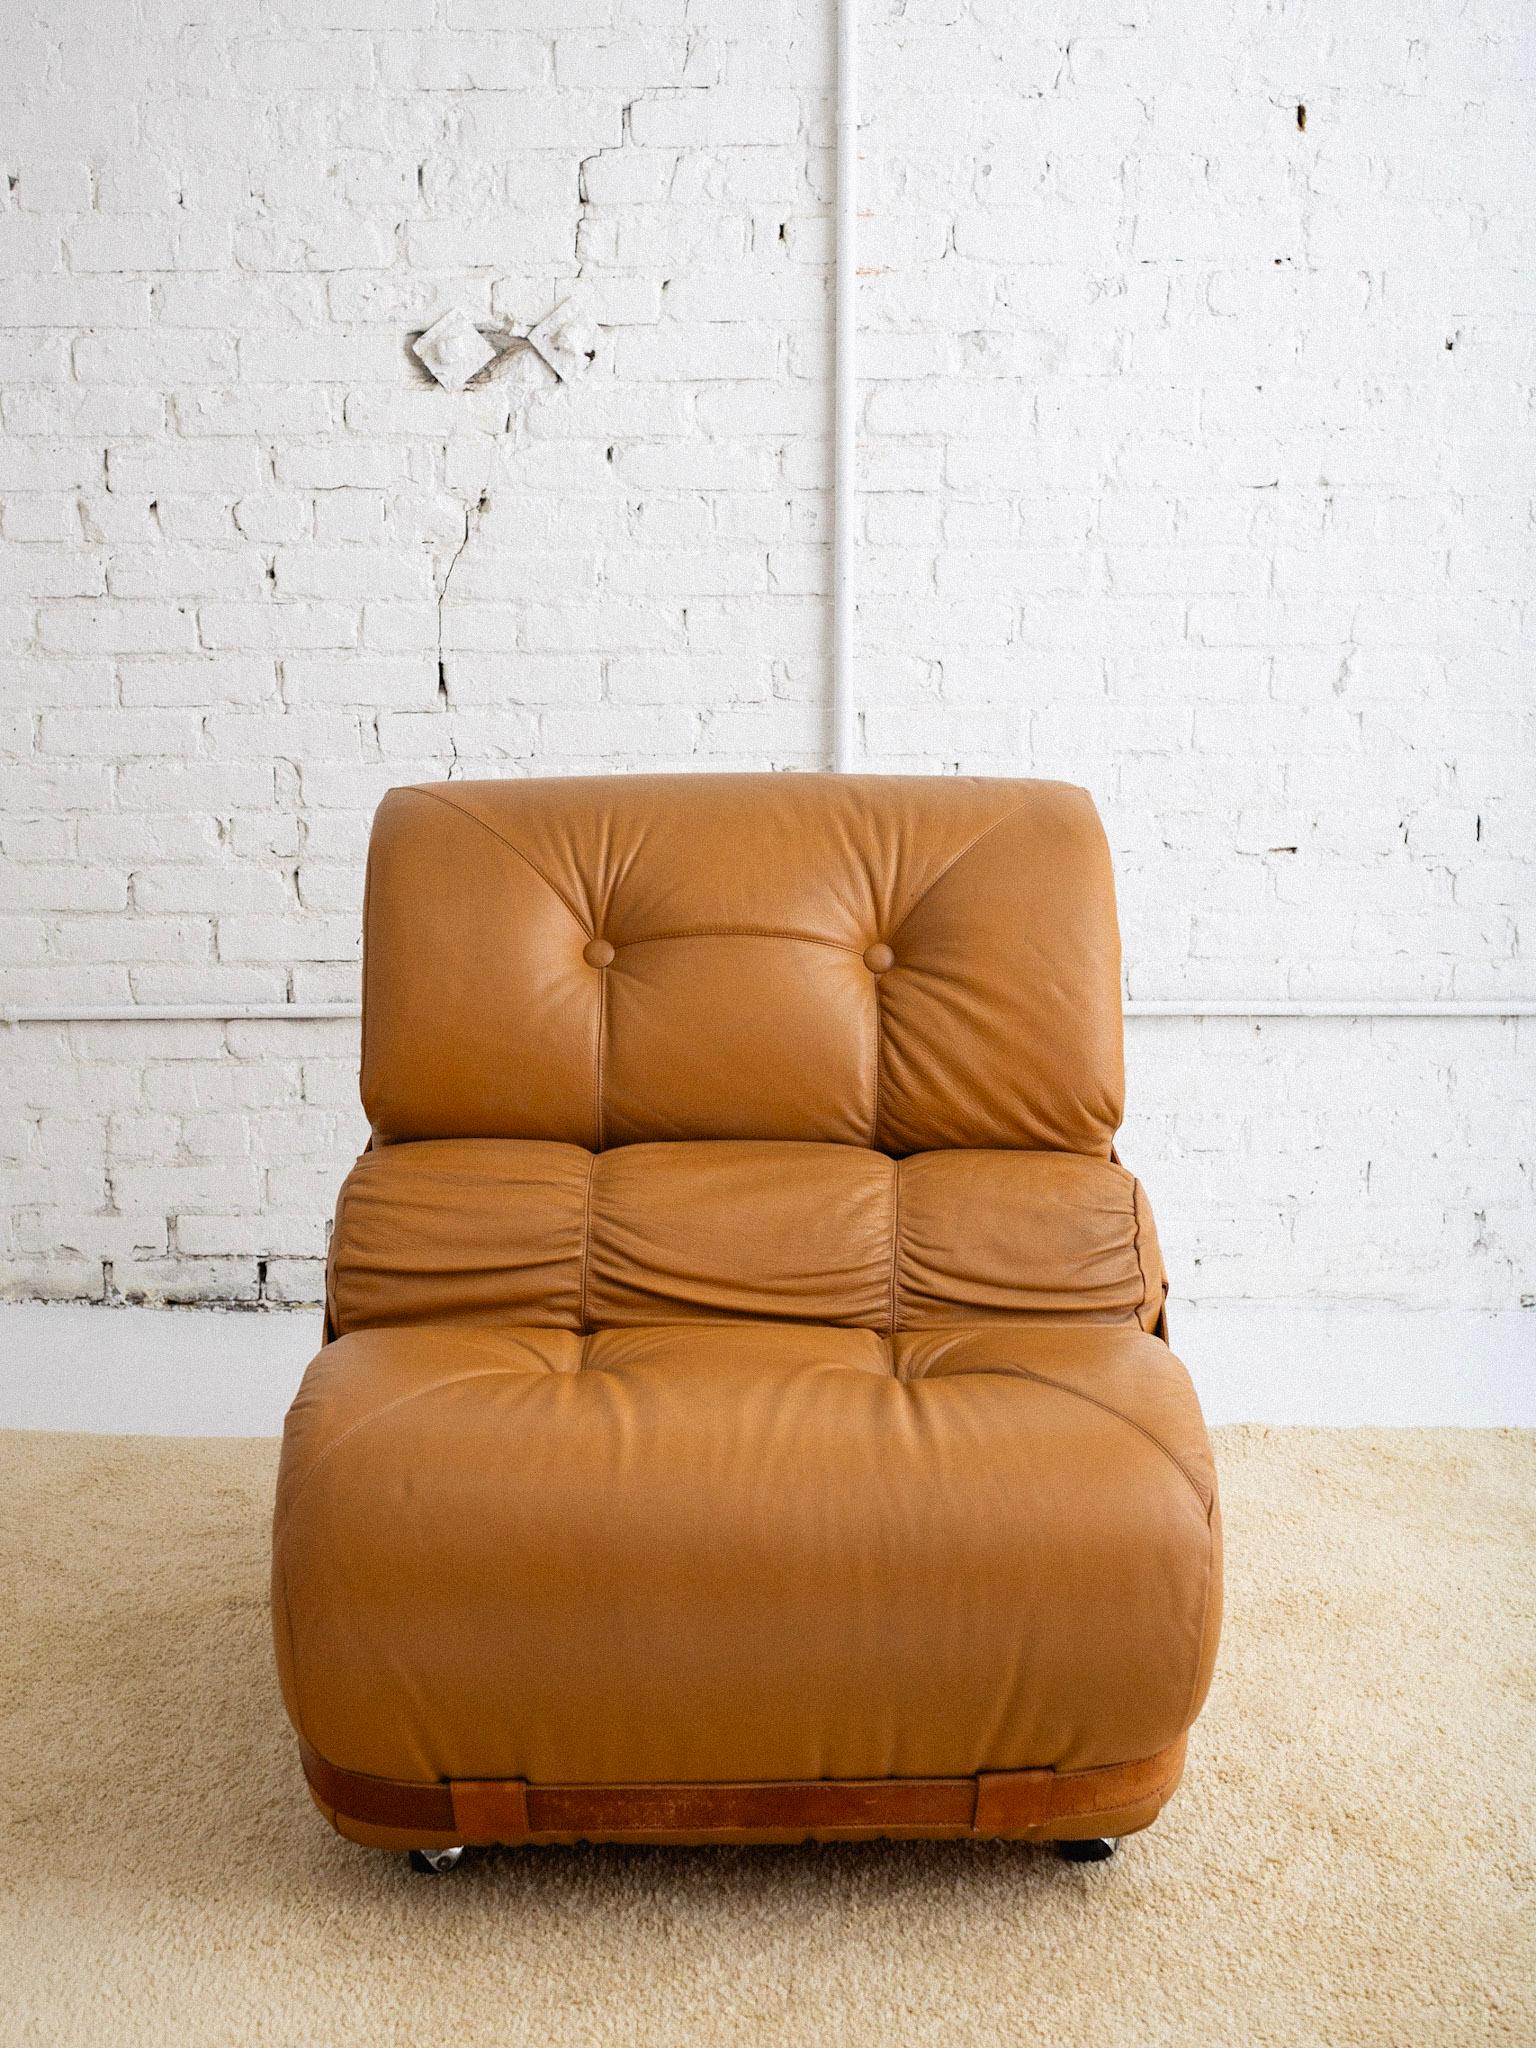 Overstuffed Italian Leather Lounge Chair & Ottoman In Good Condition For Sale In Brooklyn, NY